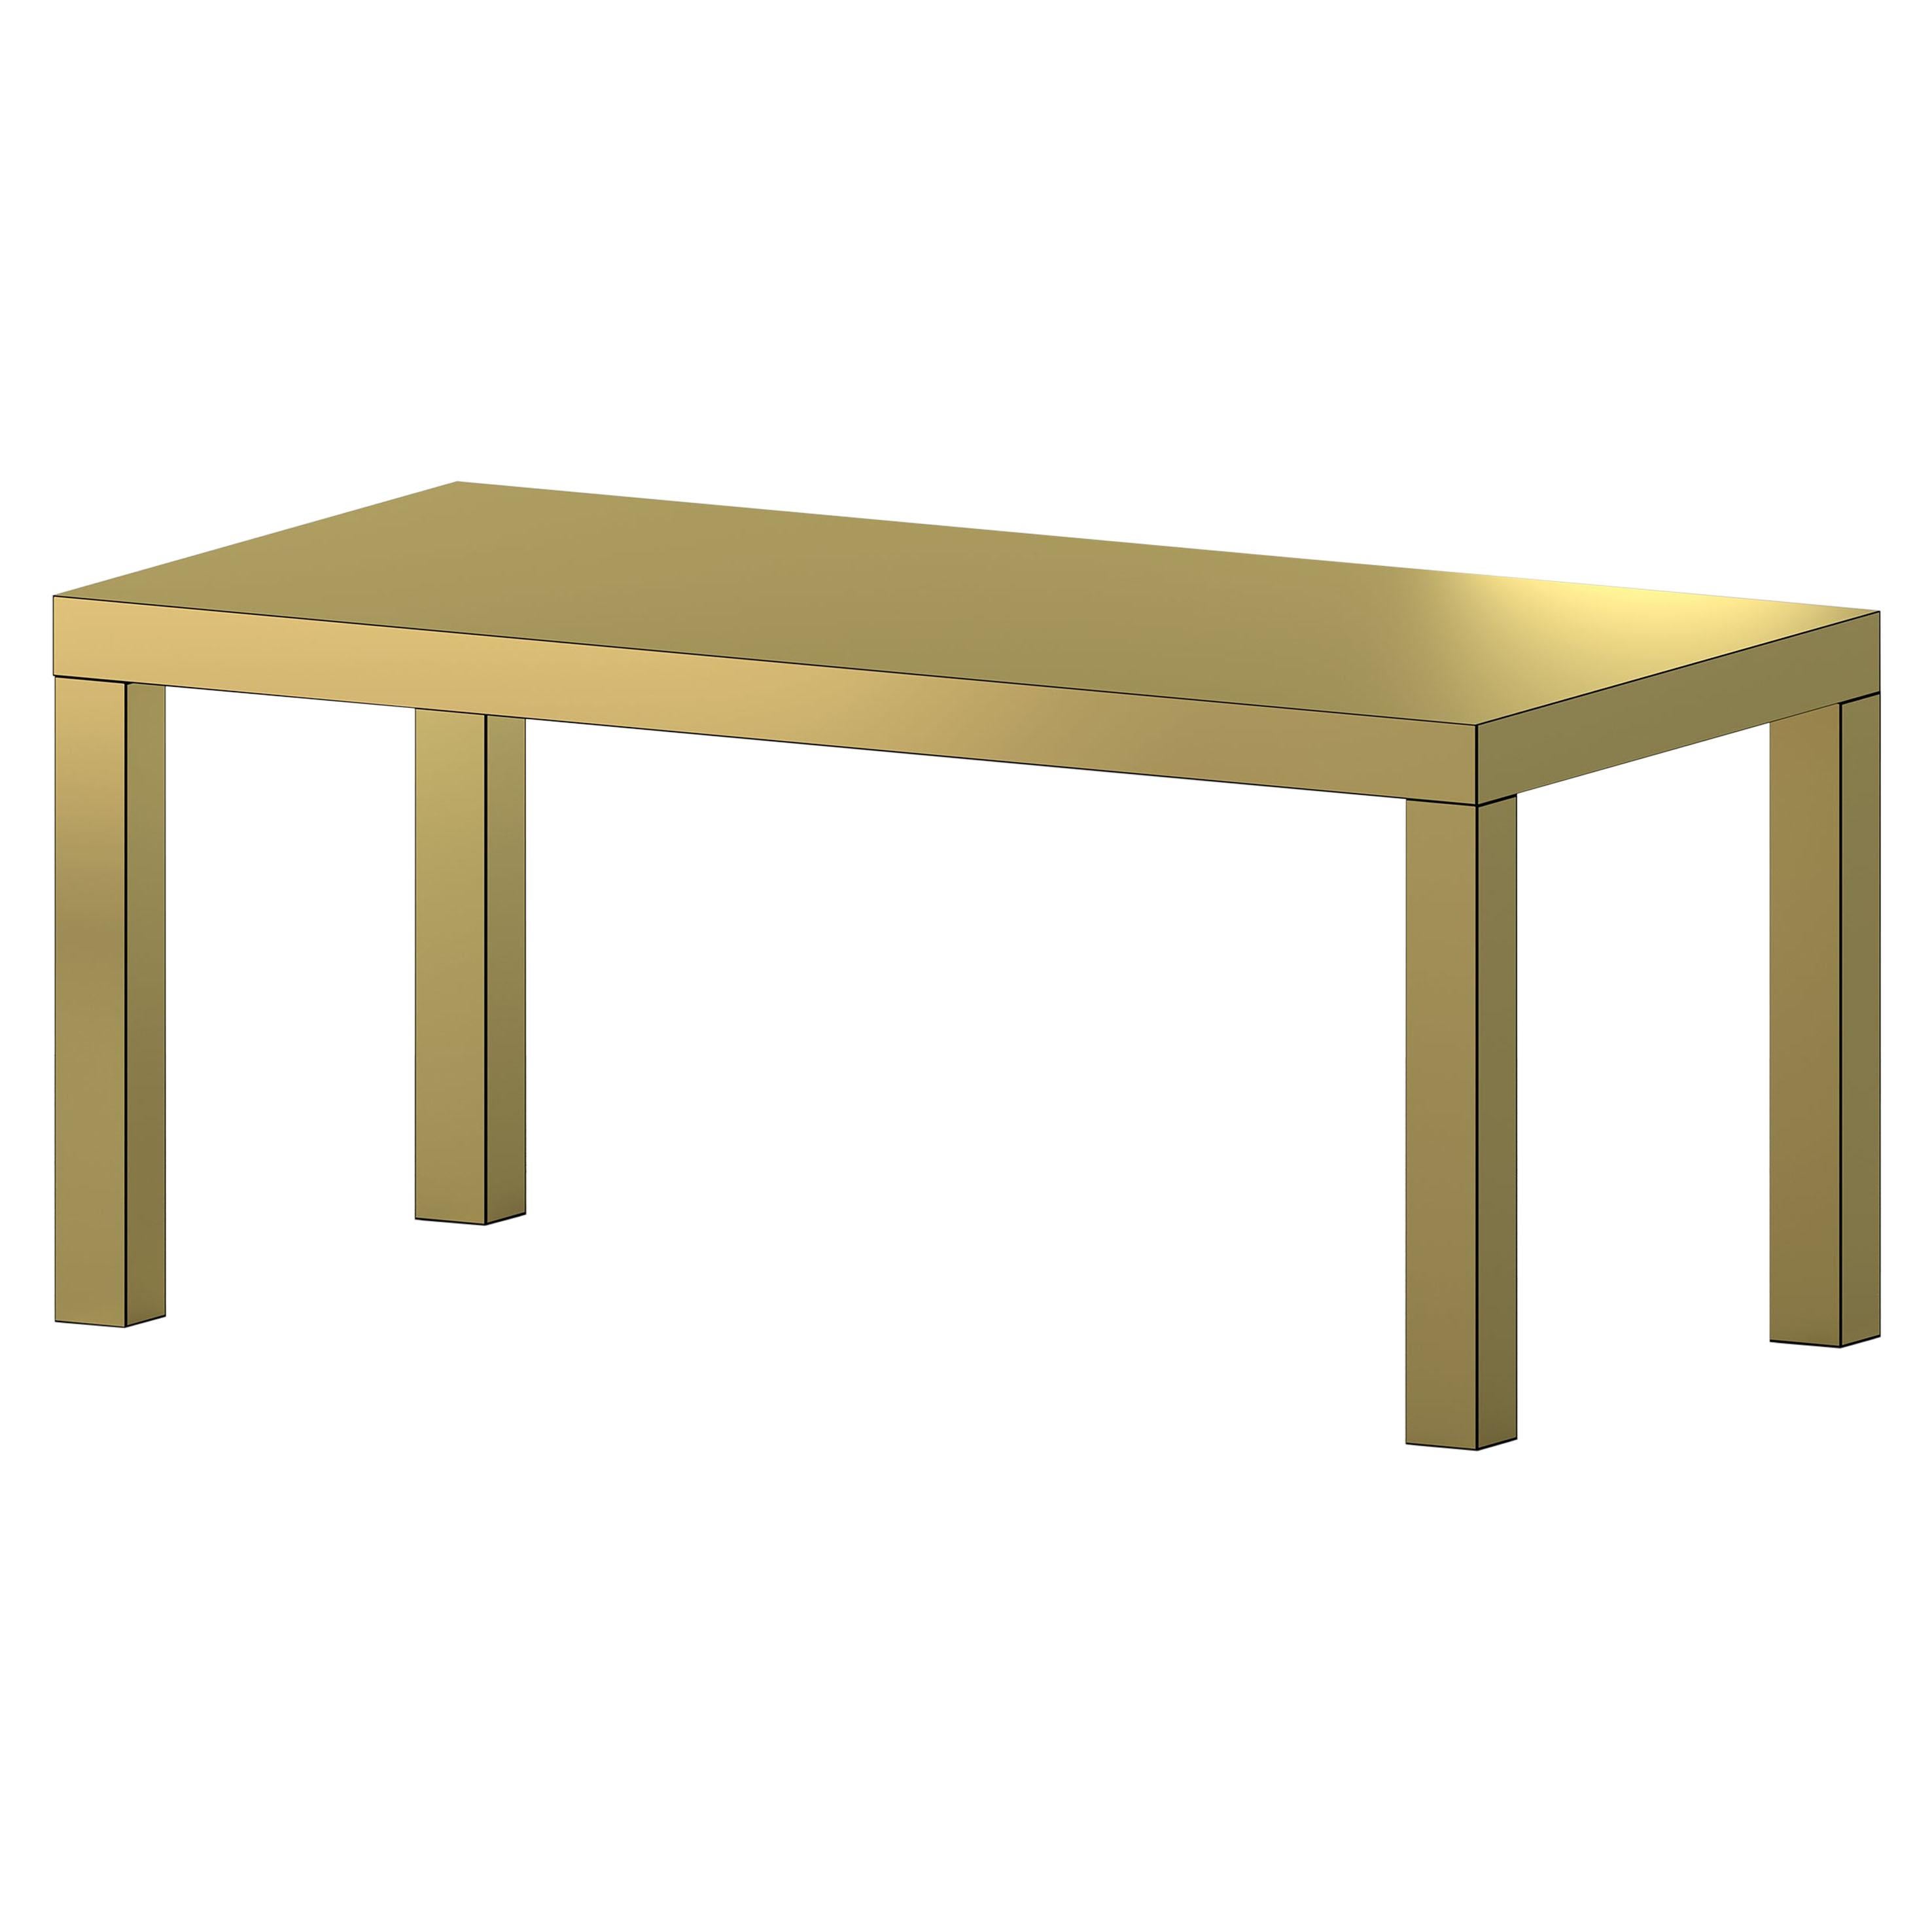 Contemporary Table/Desk Brushed Gold Hitan Aluminium by Chapel Petrassi For Sale